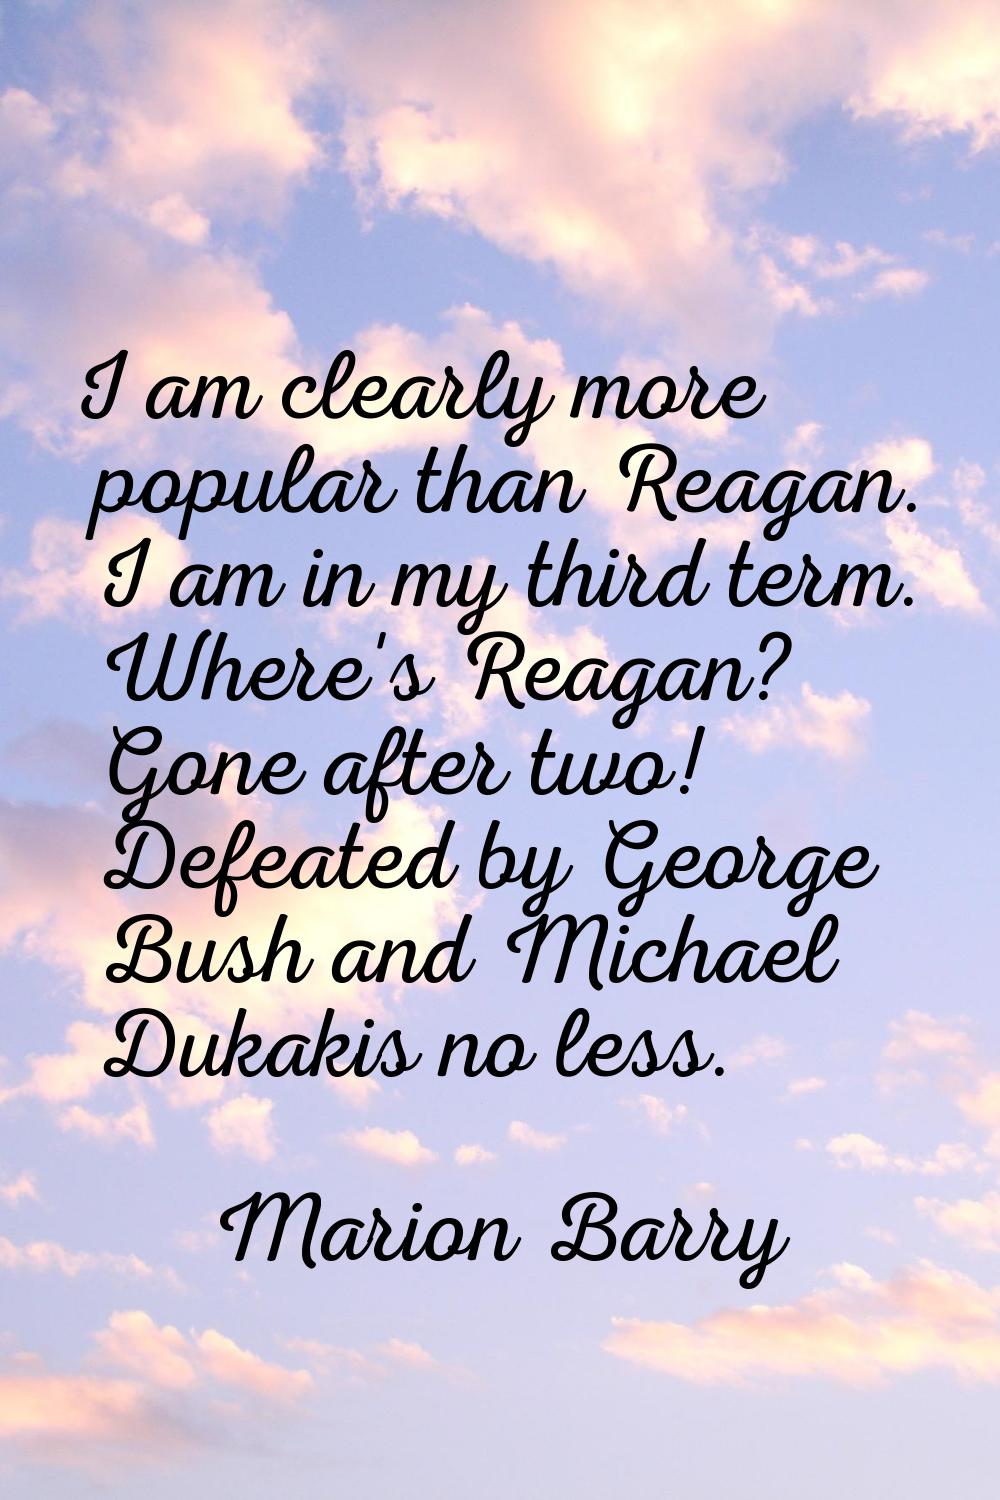 I am clearly more popular than Reagan. I am in my third term. Where's Reagan? Gone after two! Defea